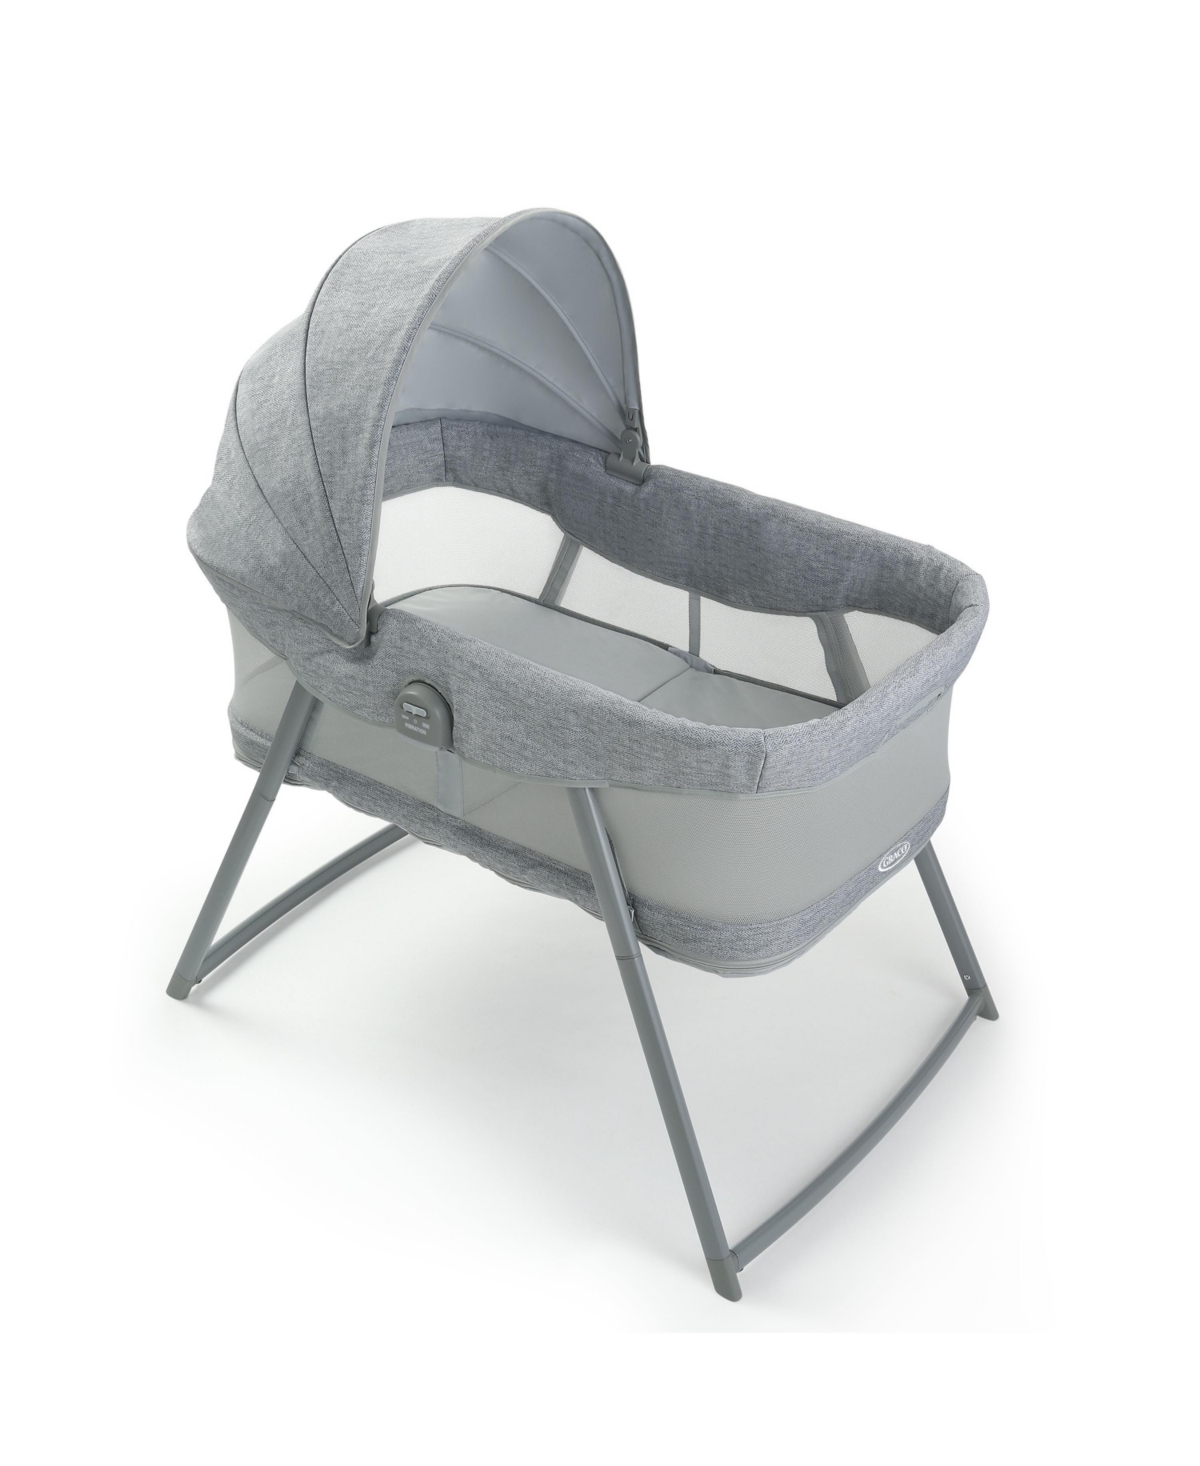 Graco Dreammore 3-in-1 Portable Bassinet Travel Crib In Beau